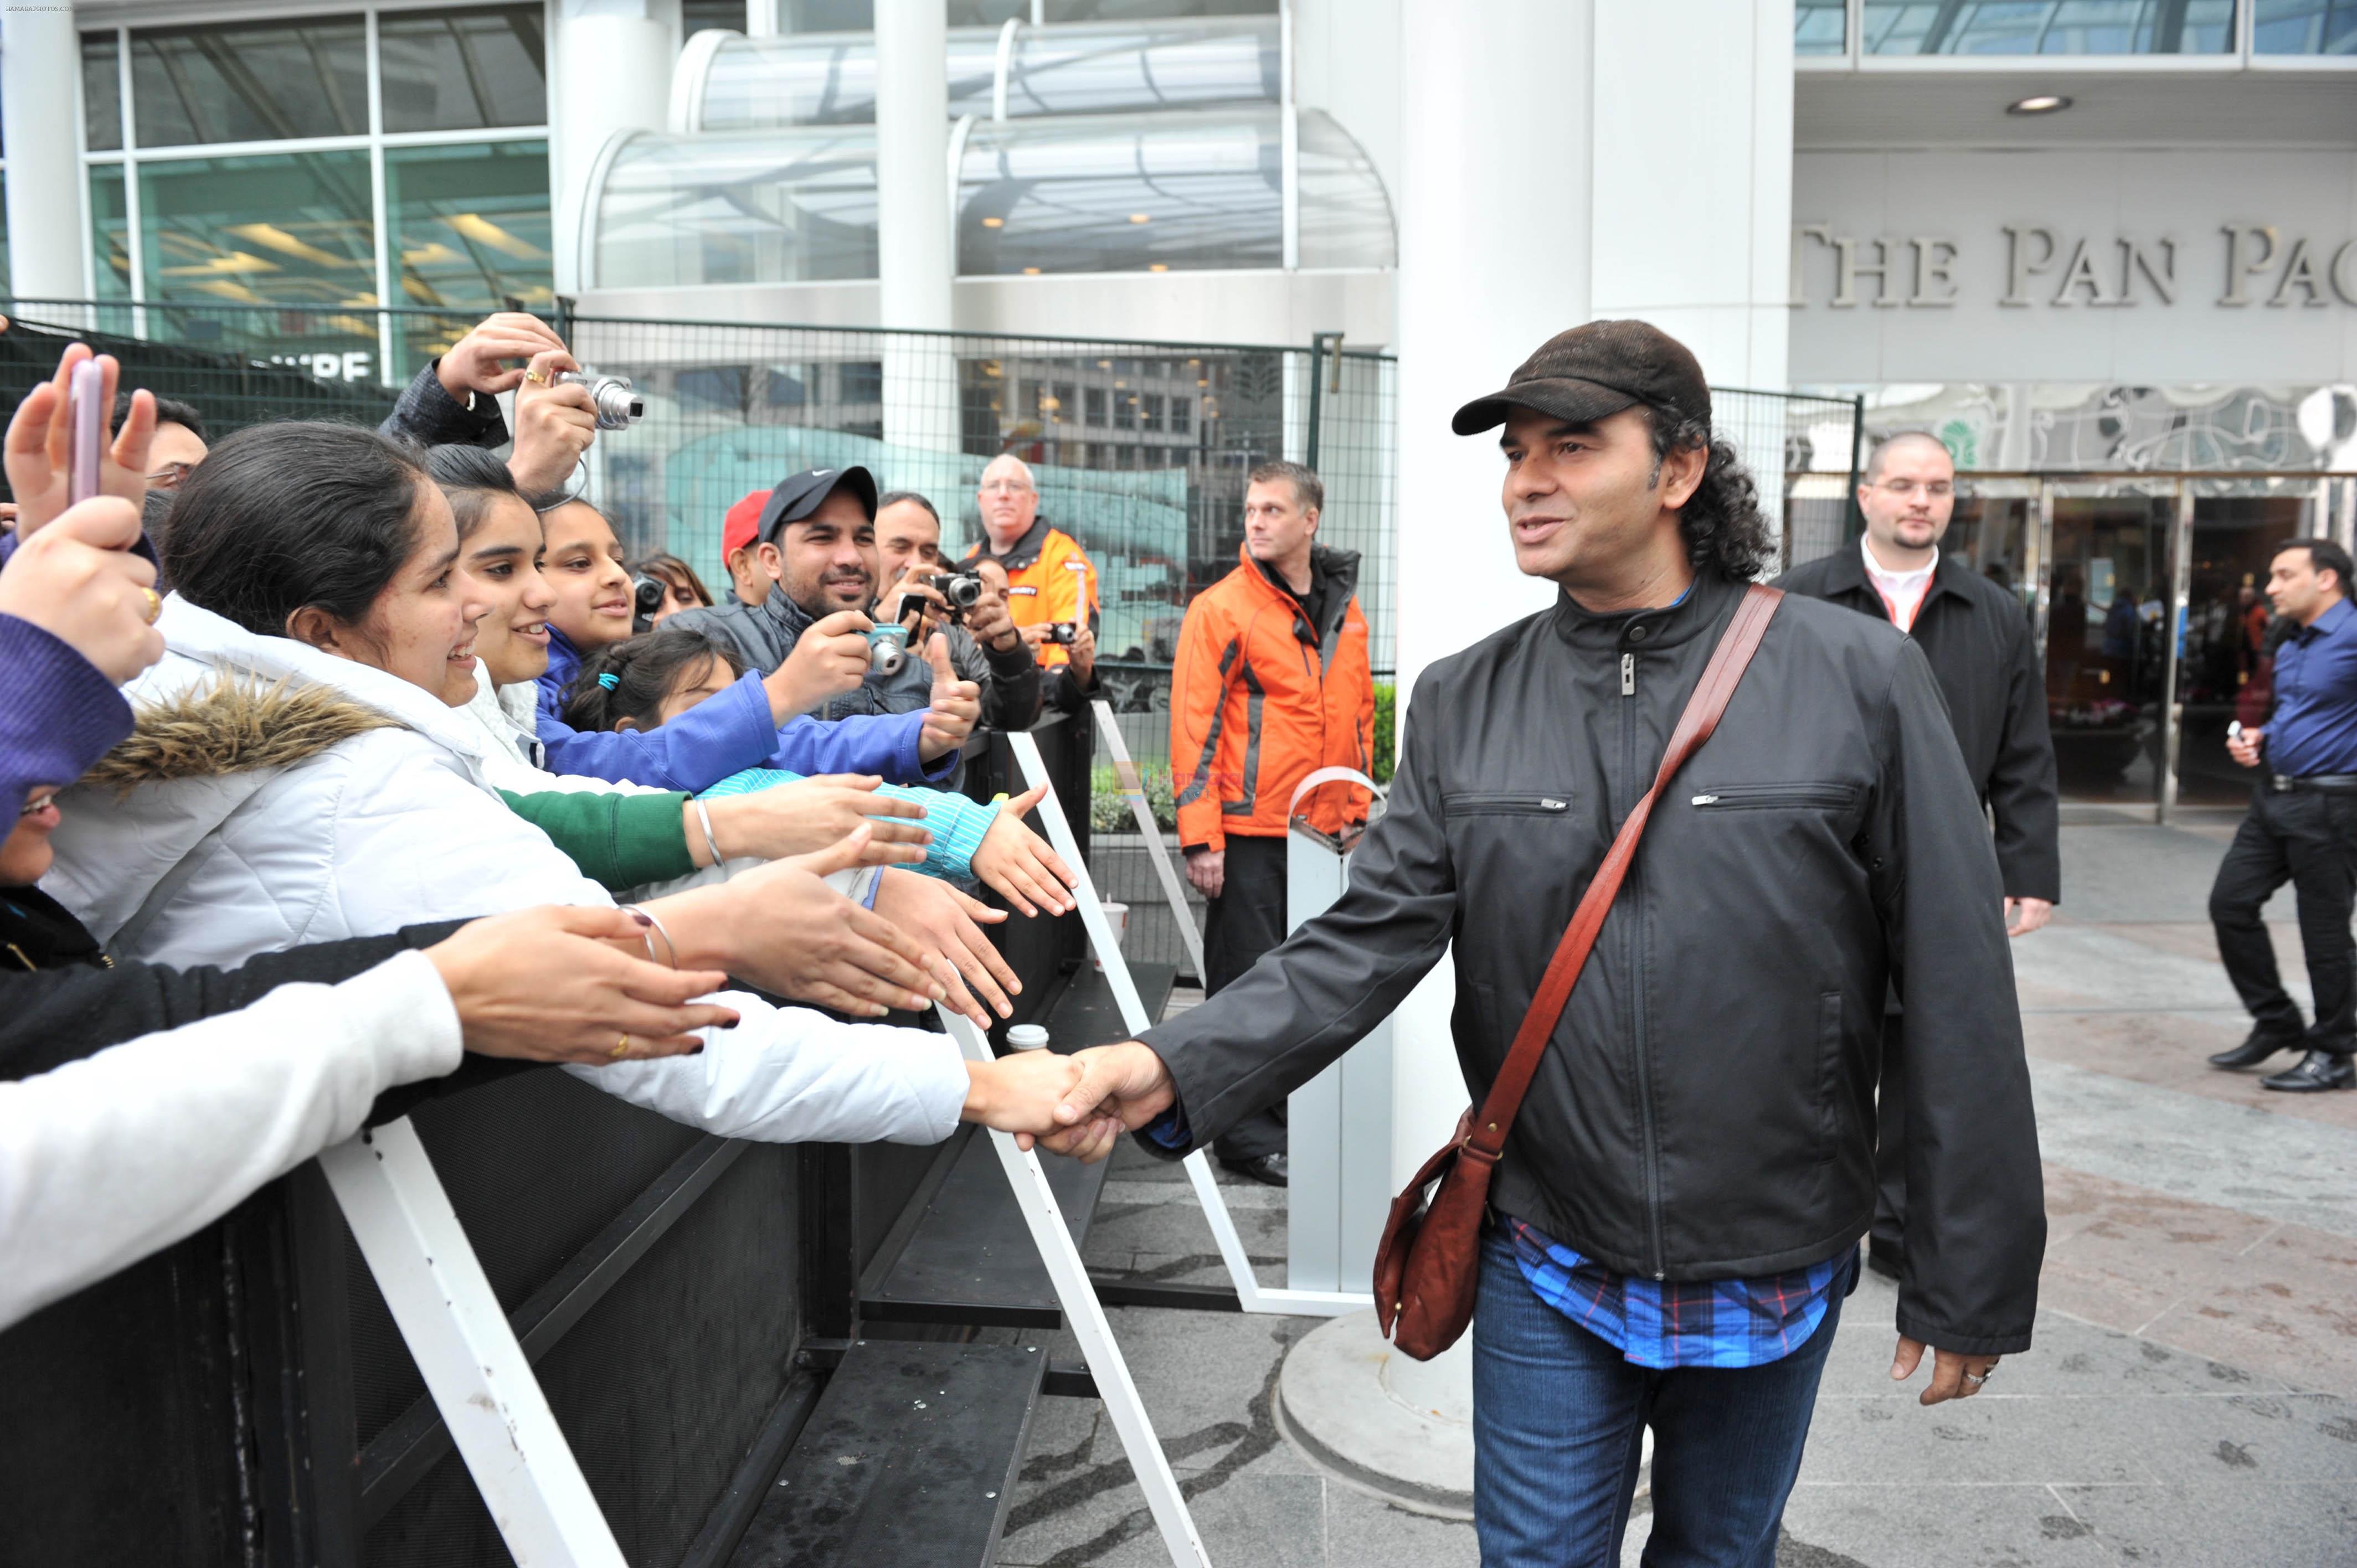 Mohit Chauhan arrive in Vancouver for TOIFA 2013 on 4th April 2013